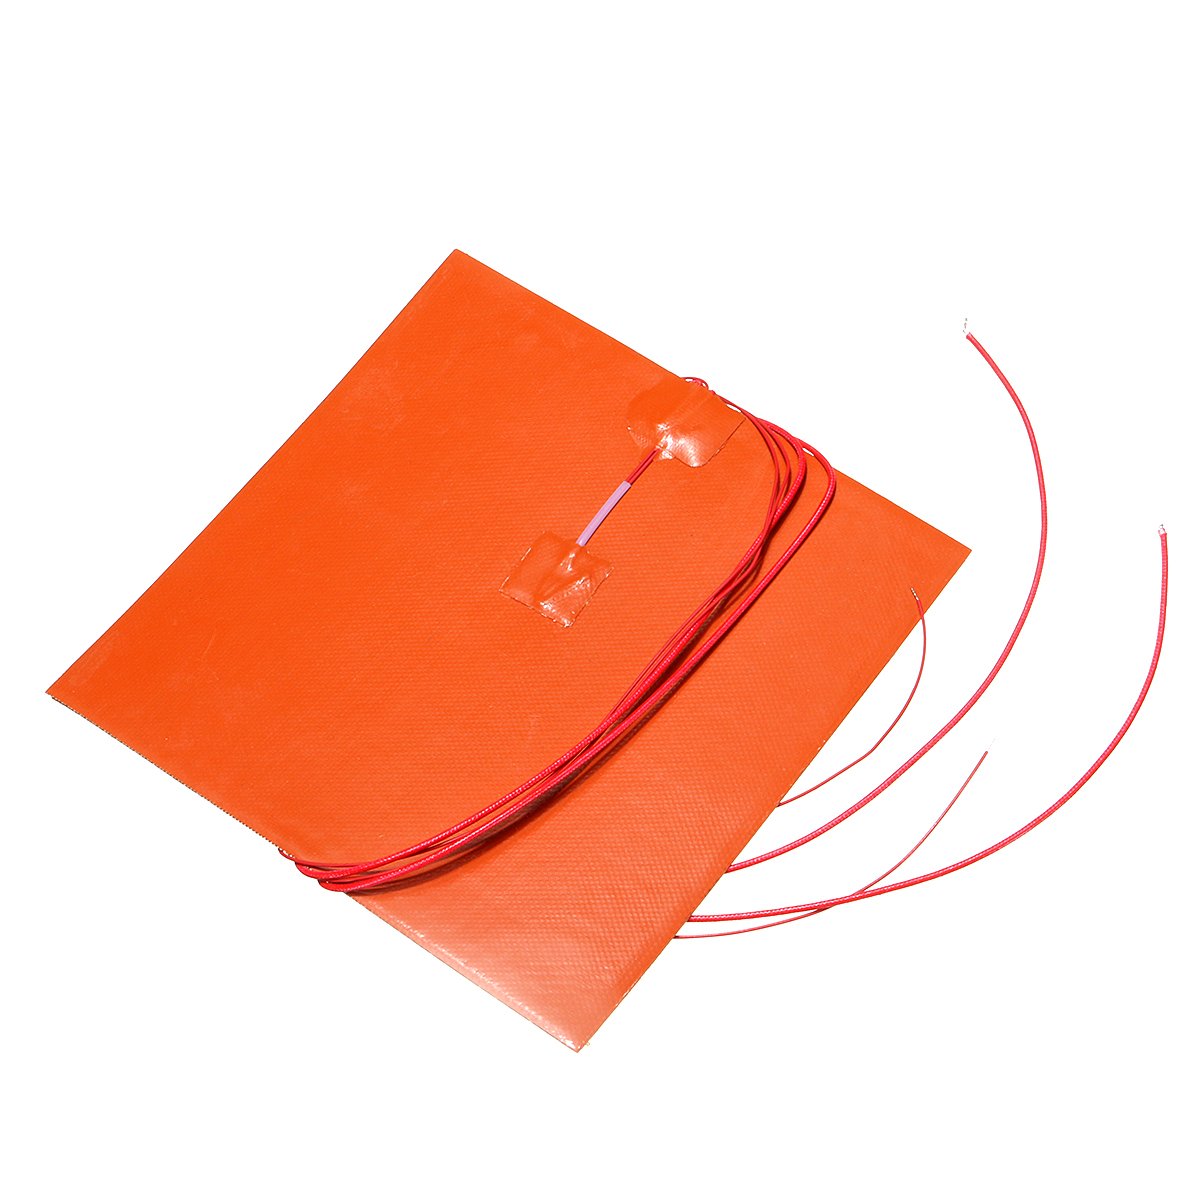 110V/220V 500W 200X200mm Thermistor Silicone Heated Bed Heating Pad for 3D Printer 1